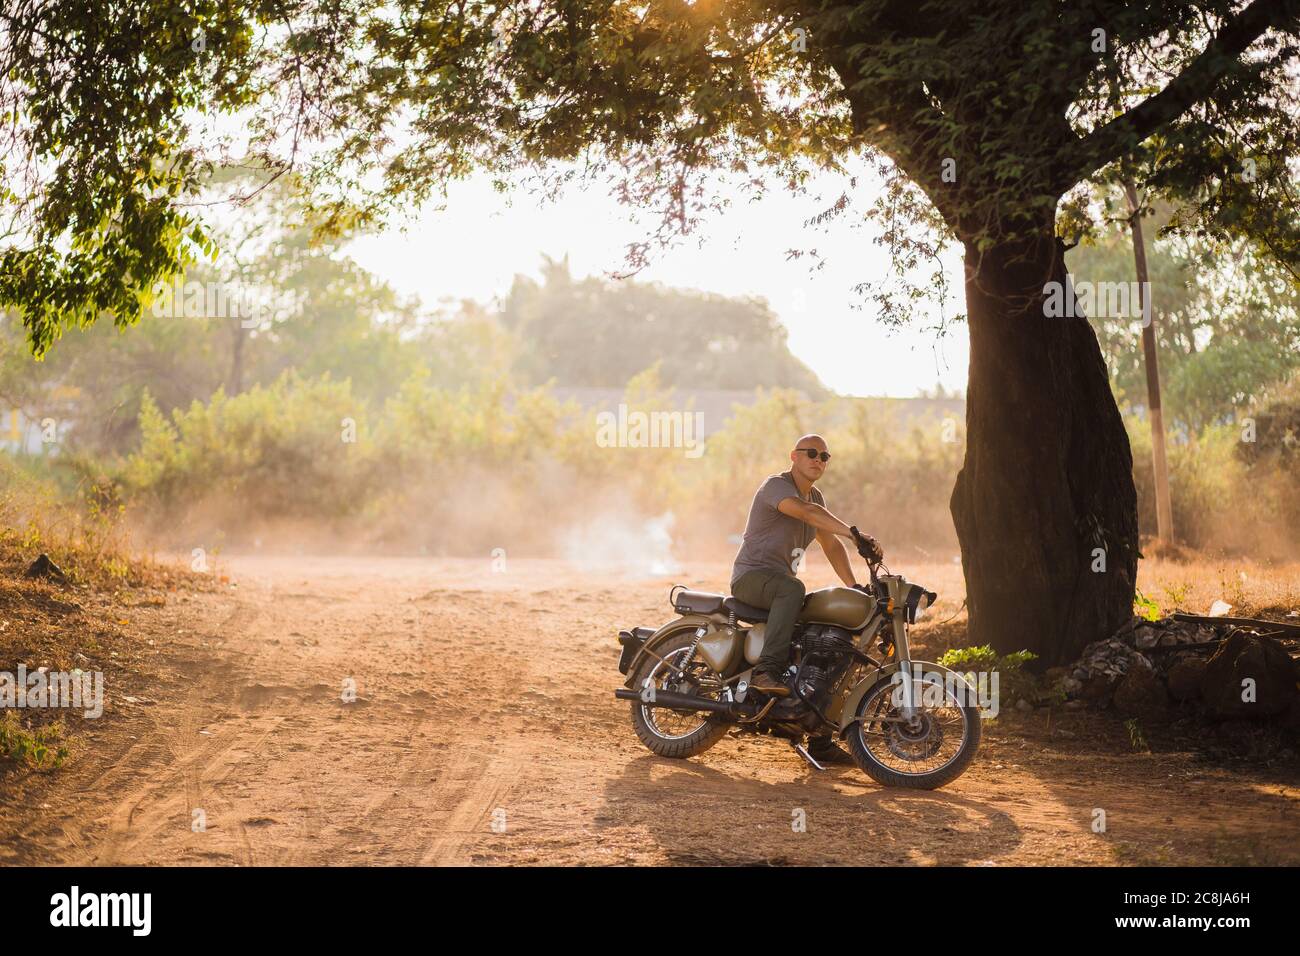 man with glasses on a motorcycle forest in nature Stock Photo